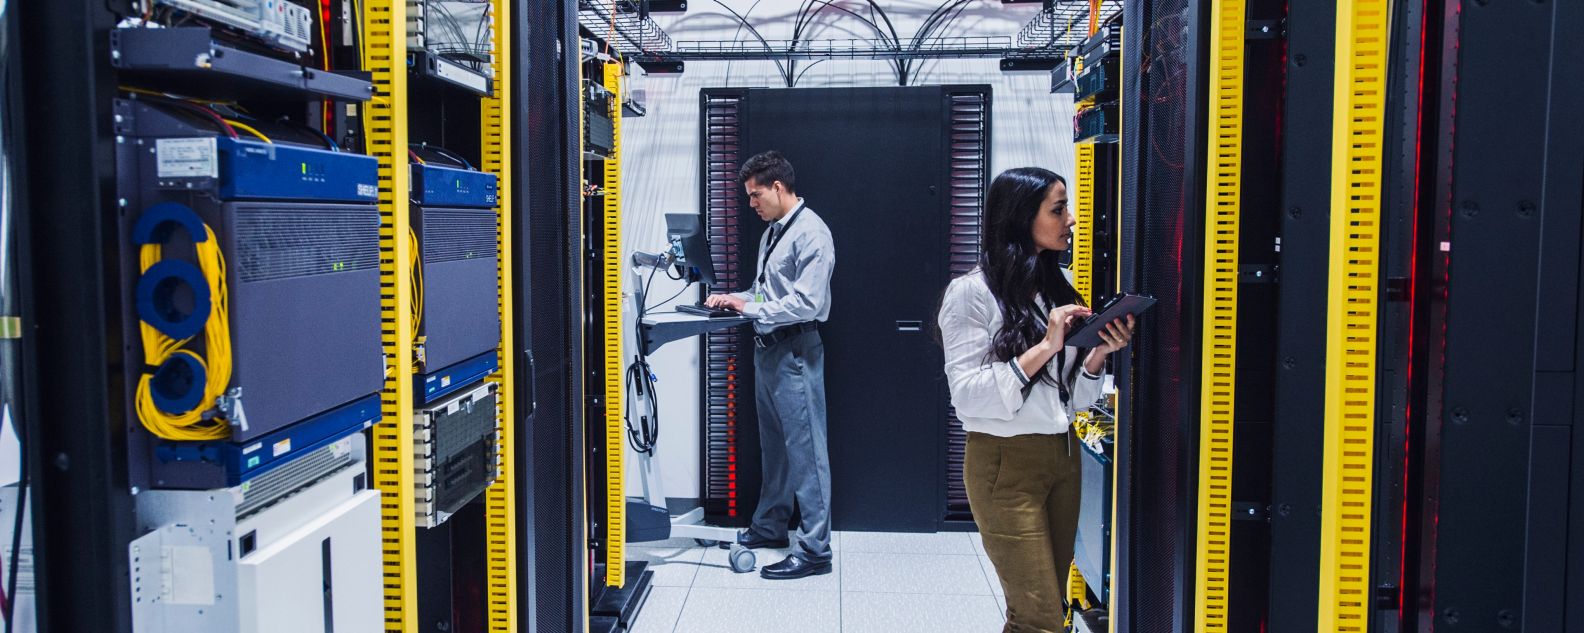 Two people working in a data center